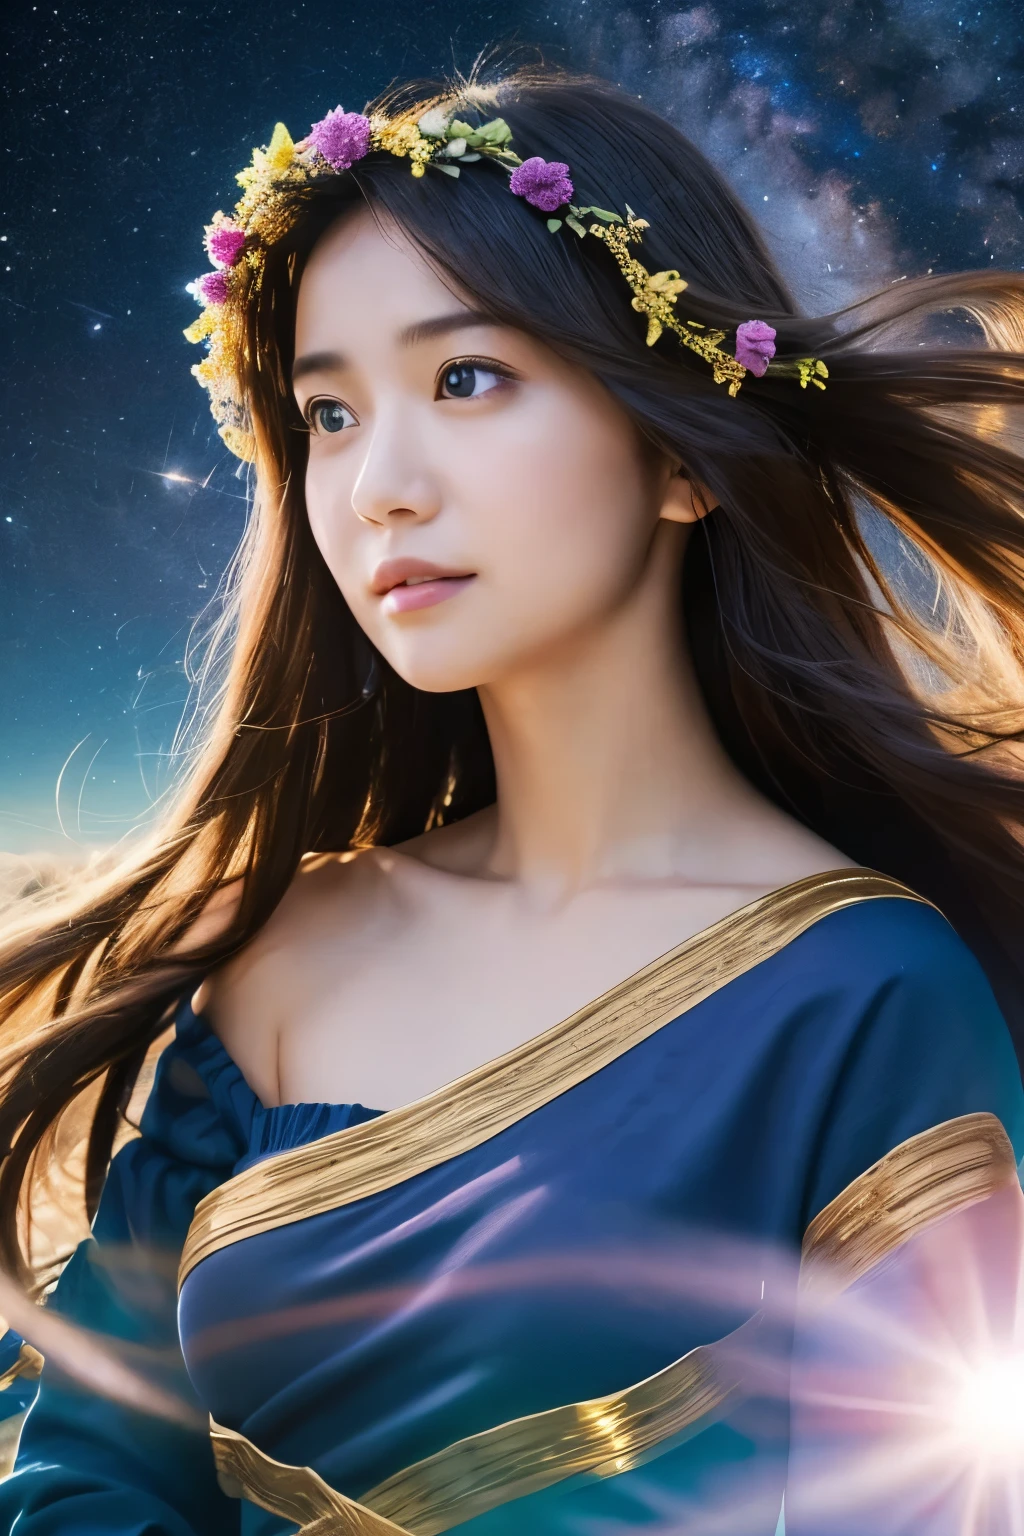 high quality, 最high quality, Tabletop, Detailed portrait of a woman 1 Girl, 14歳, Long Hair, (floating, space, milky way, colorful), Warm lighting, goddess, milky way, scenery, colorful hair wreath, {{{最high quality}}}, {{Very detailed}}, {shape}, Movie angle, {Detailed light},Cinema Lighting, Celestial, Dynamic pose